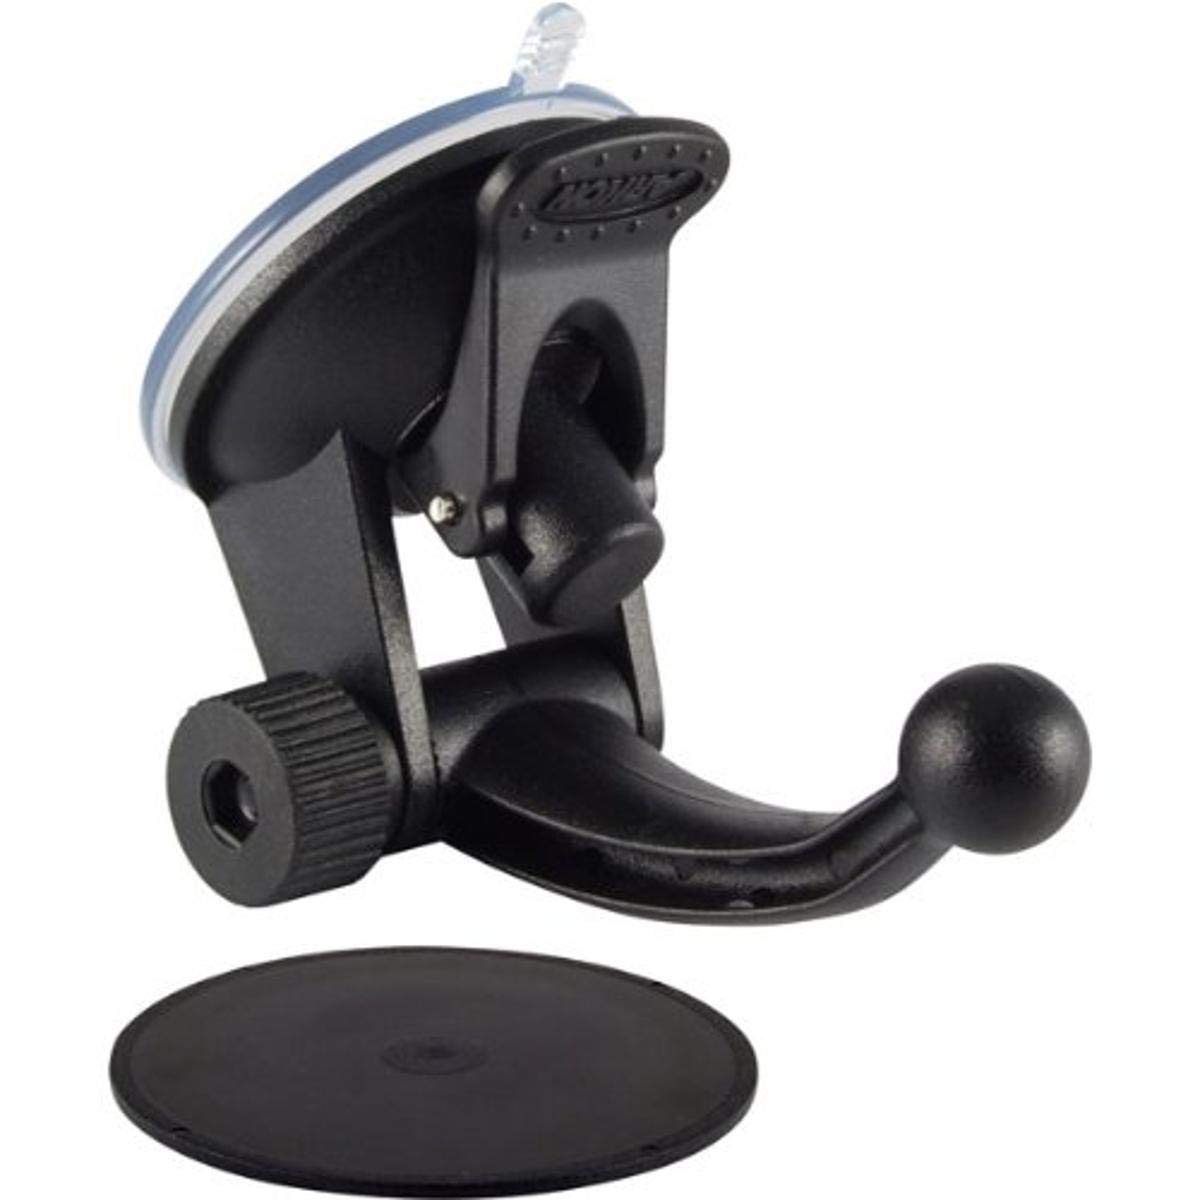 Arkon Replacement Upgrade or Additional Windshield Dashboard Suction Mounting Pedestal for Garmin nuvi 40 50 1450 1200 GPS